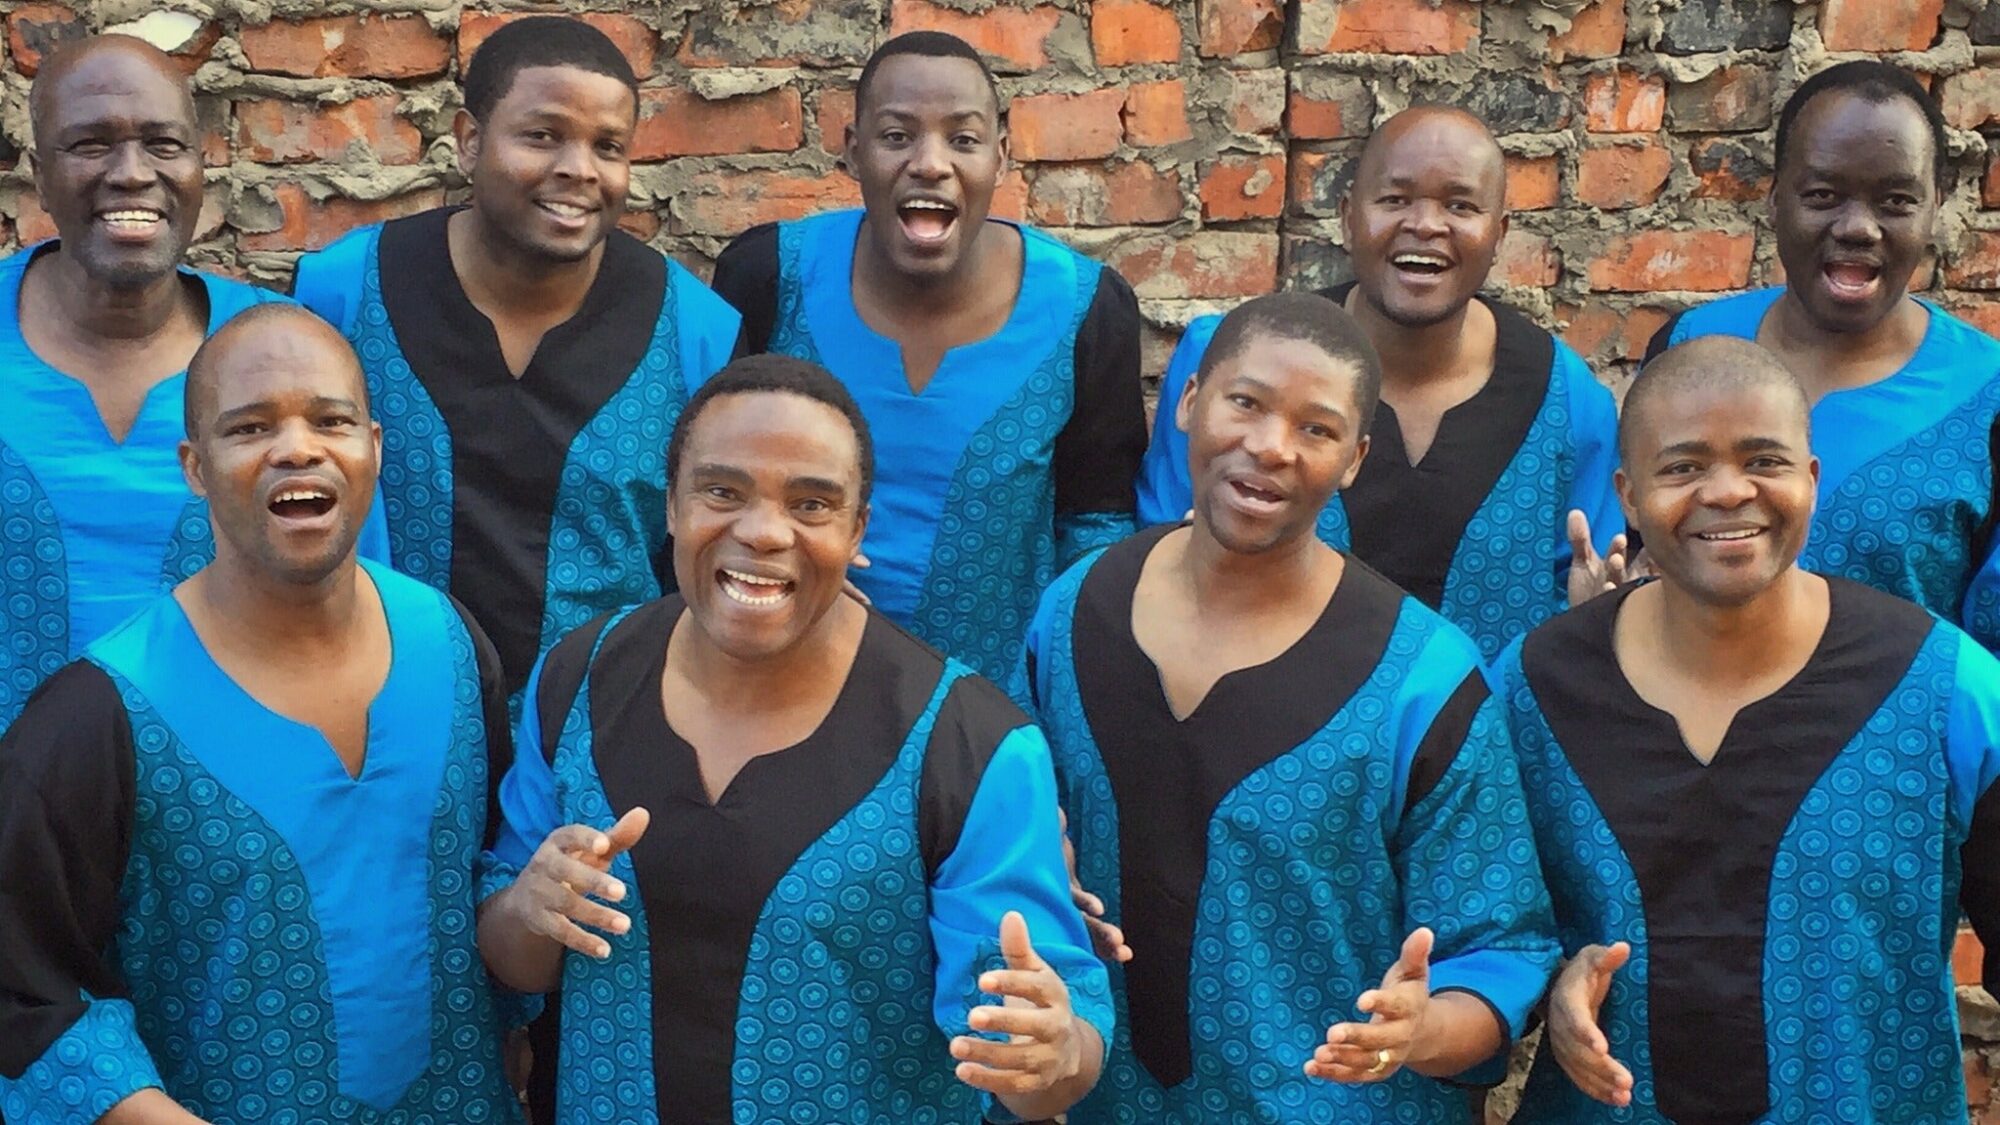 Image name Ladysmith Black Mambazo at Grand Opera House York York the 32 image from the post Ladysmith Black Mambazo at Grand Opera House, York, York in Yorkshire.com.